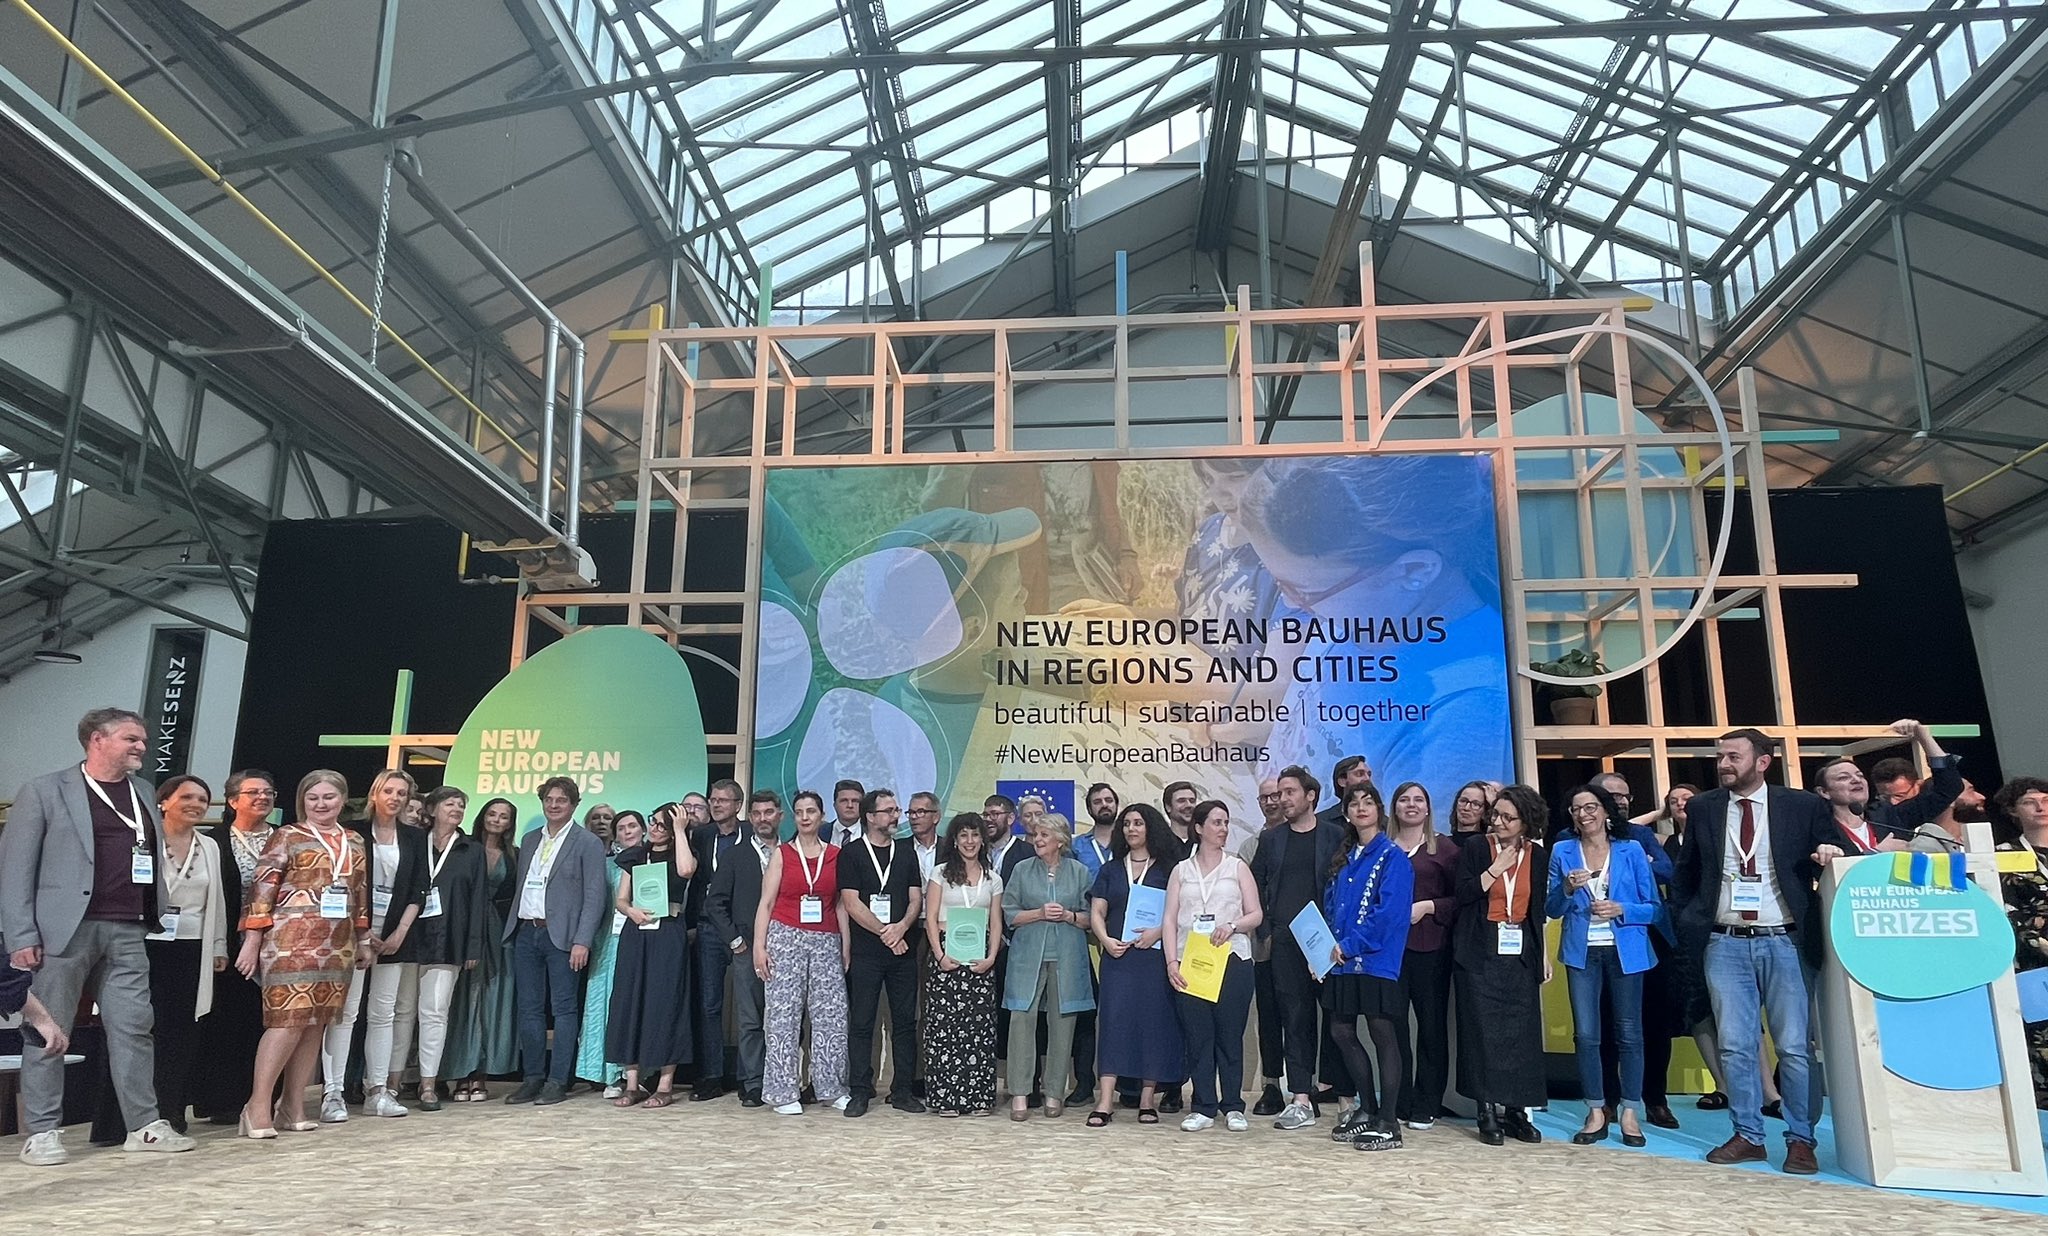 Roberta Capozucca, Communication Officer at Materahub, participated to the New European Bauhaus Prizes 2023 ceremony in Bruxelles (21-22 June).